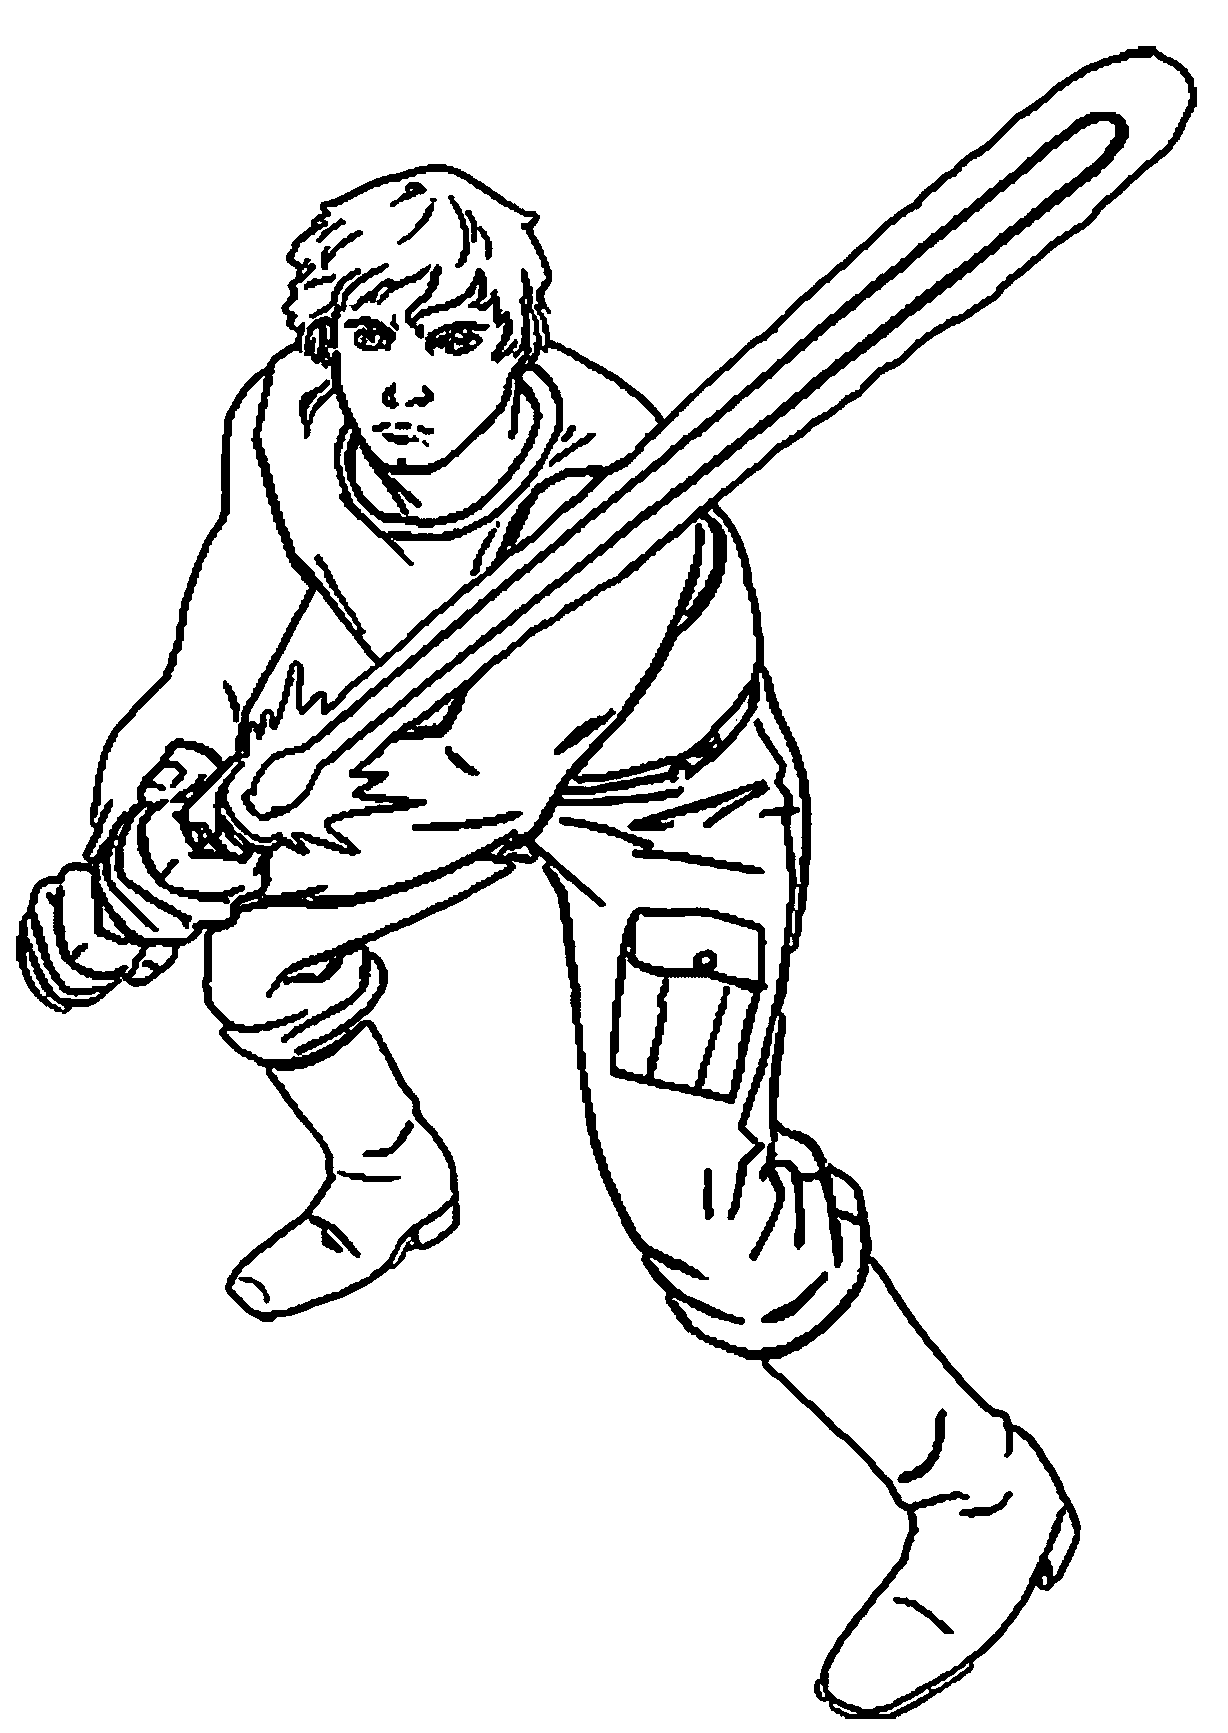 Luke Skywalker Coloring Pages Best Coloring Pages For Kids